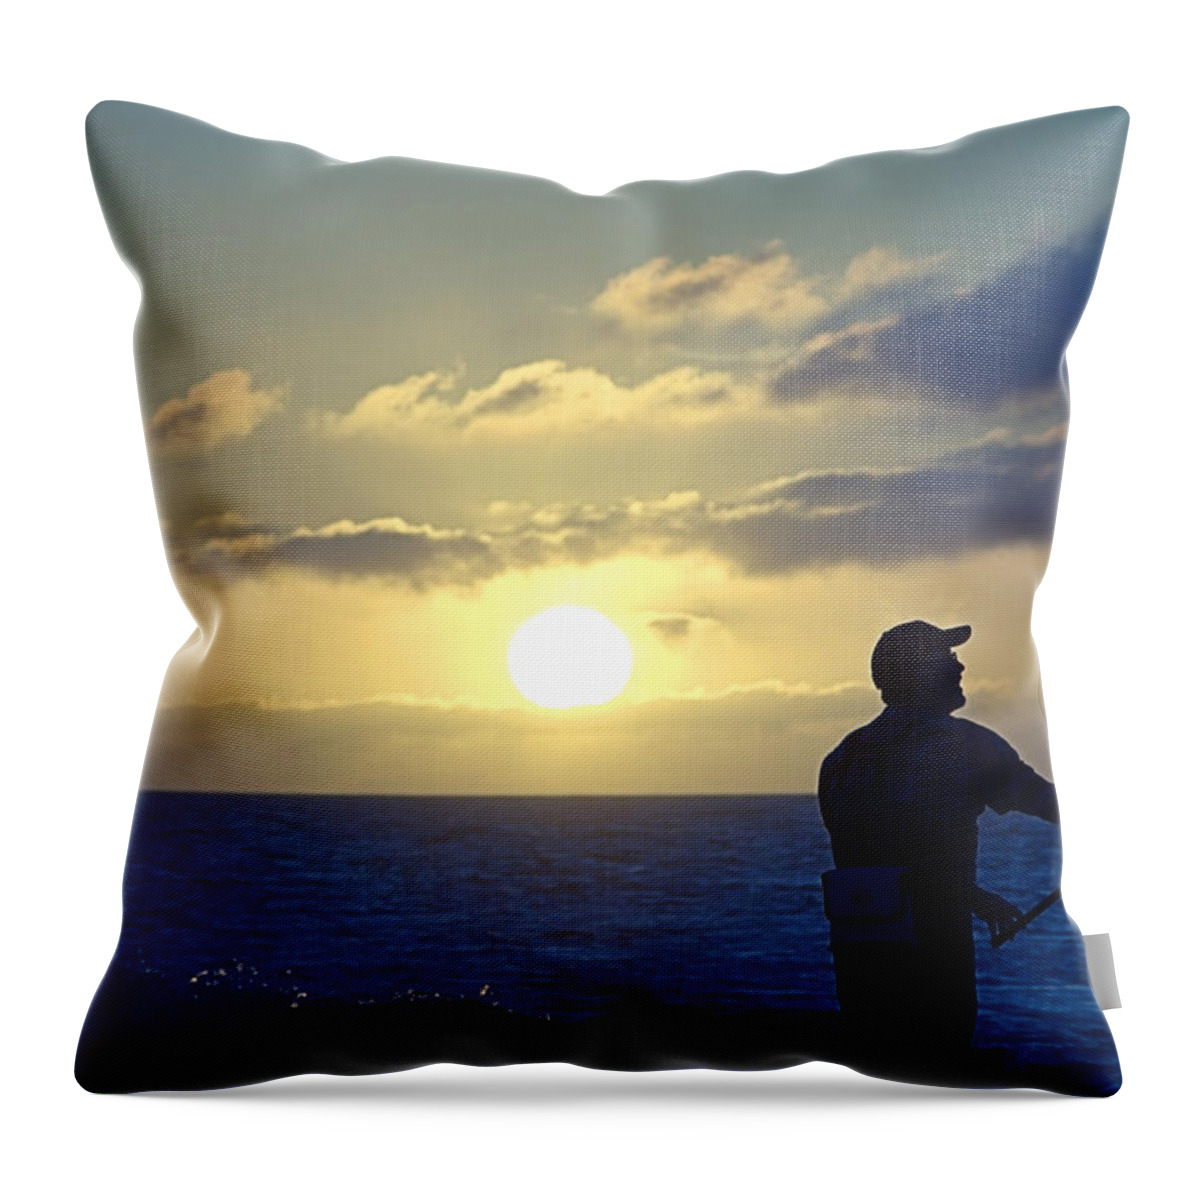 Surfcasting Throw Pillow featuring the photograph Surfcasting by Newwwman